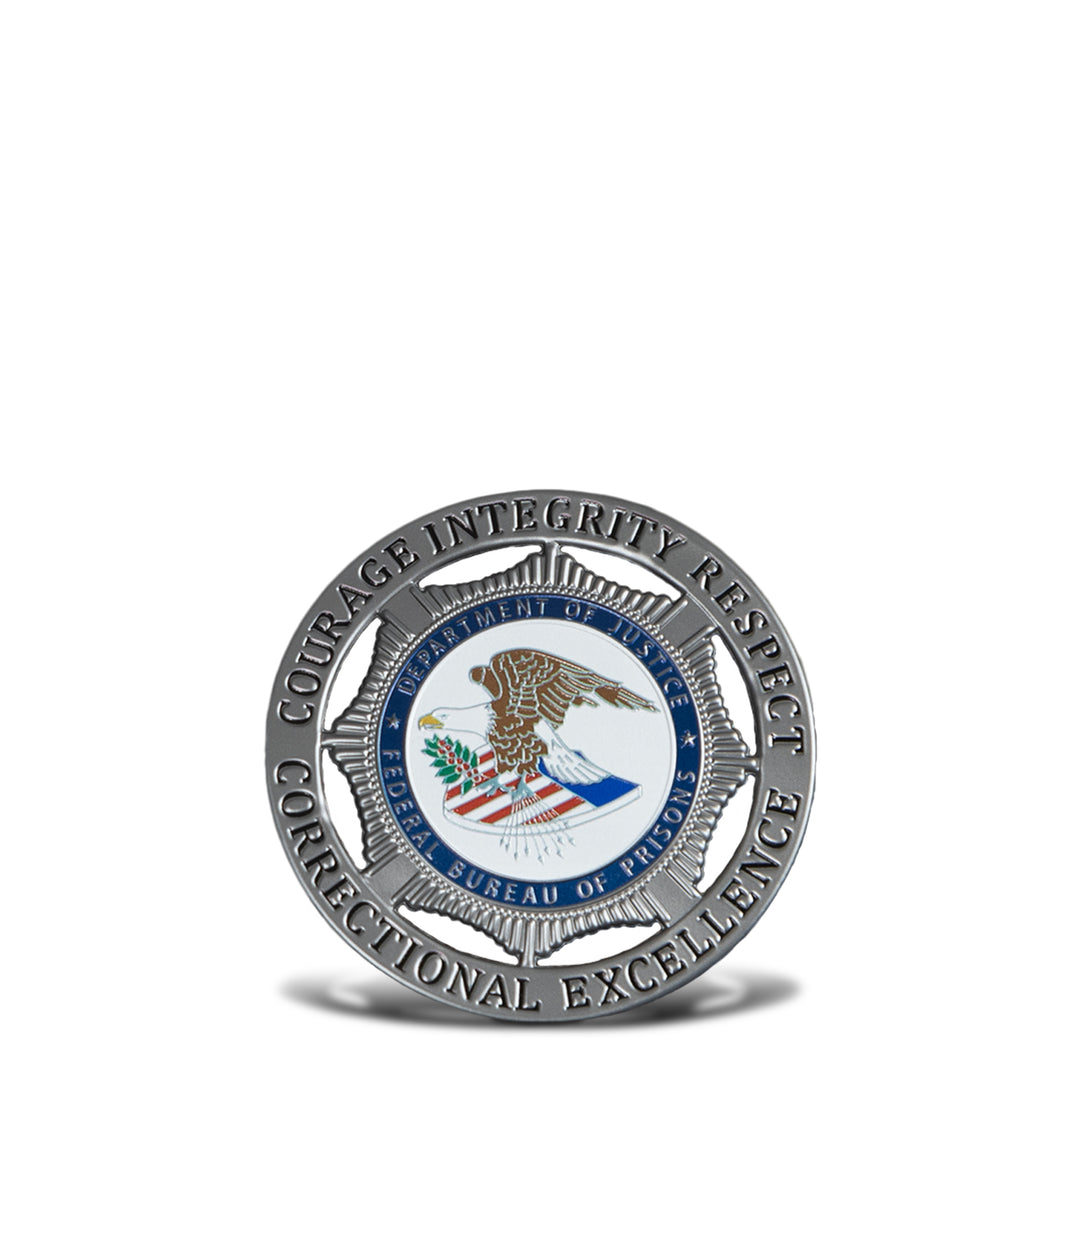 FBOP Flex Badge (Institution Purchase Only) The FBOP Flex Badge is Available for Institution Purchase Only. Please Have Your Warden or Captain Submit An Order To FBOP@firsttactical.com.